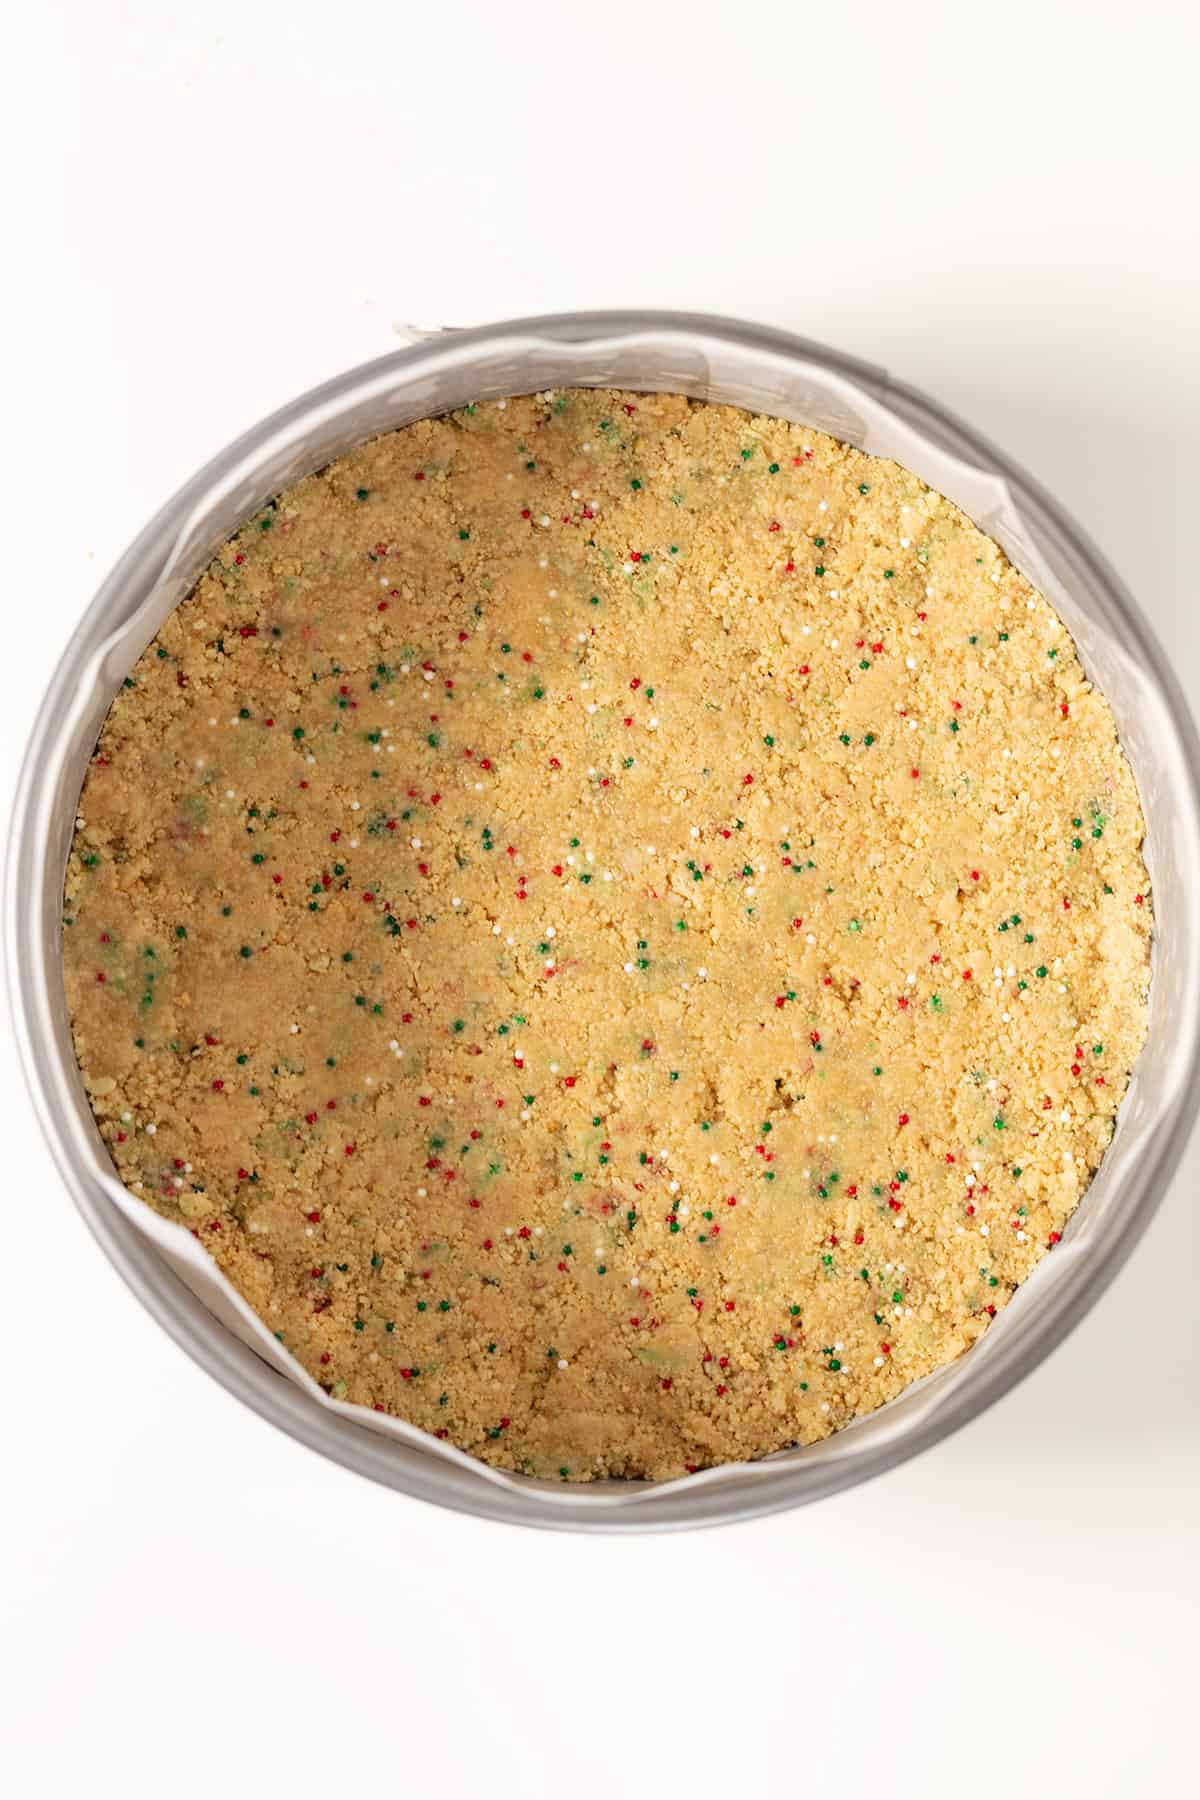 A Christmas Tree Cheesecake with sprinkles in a pan on a white surface.